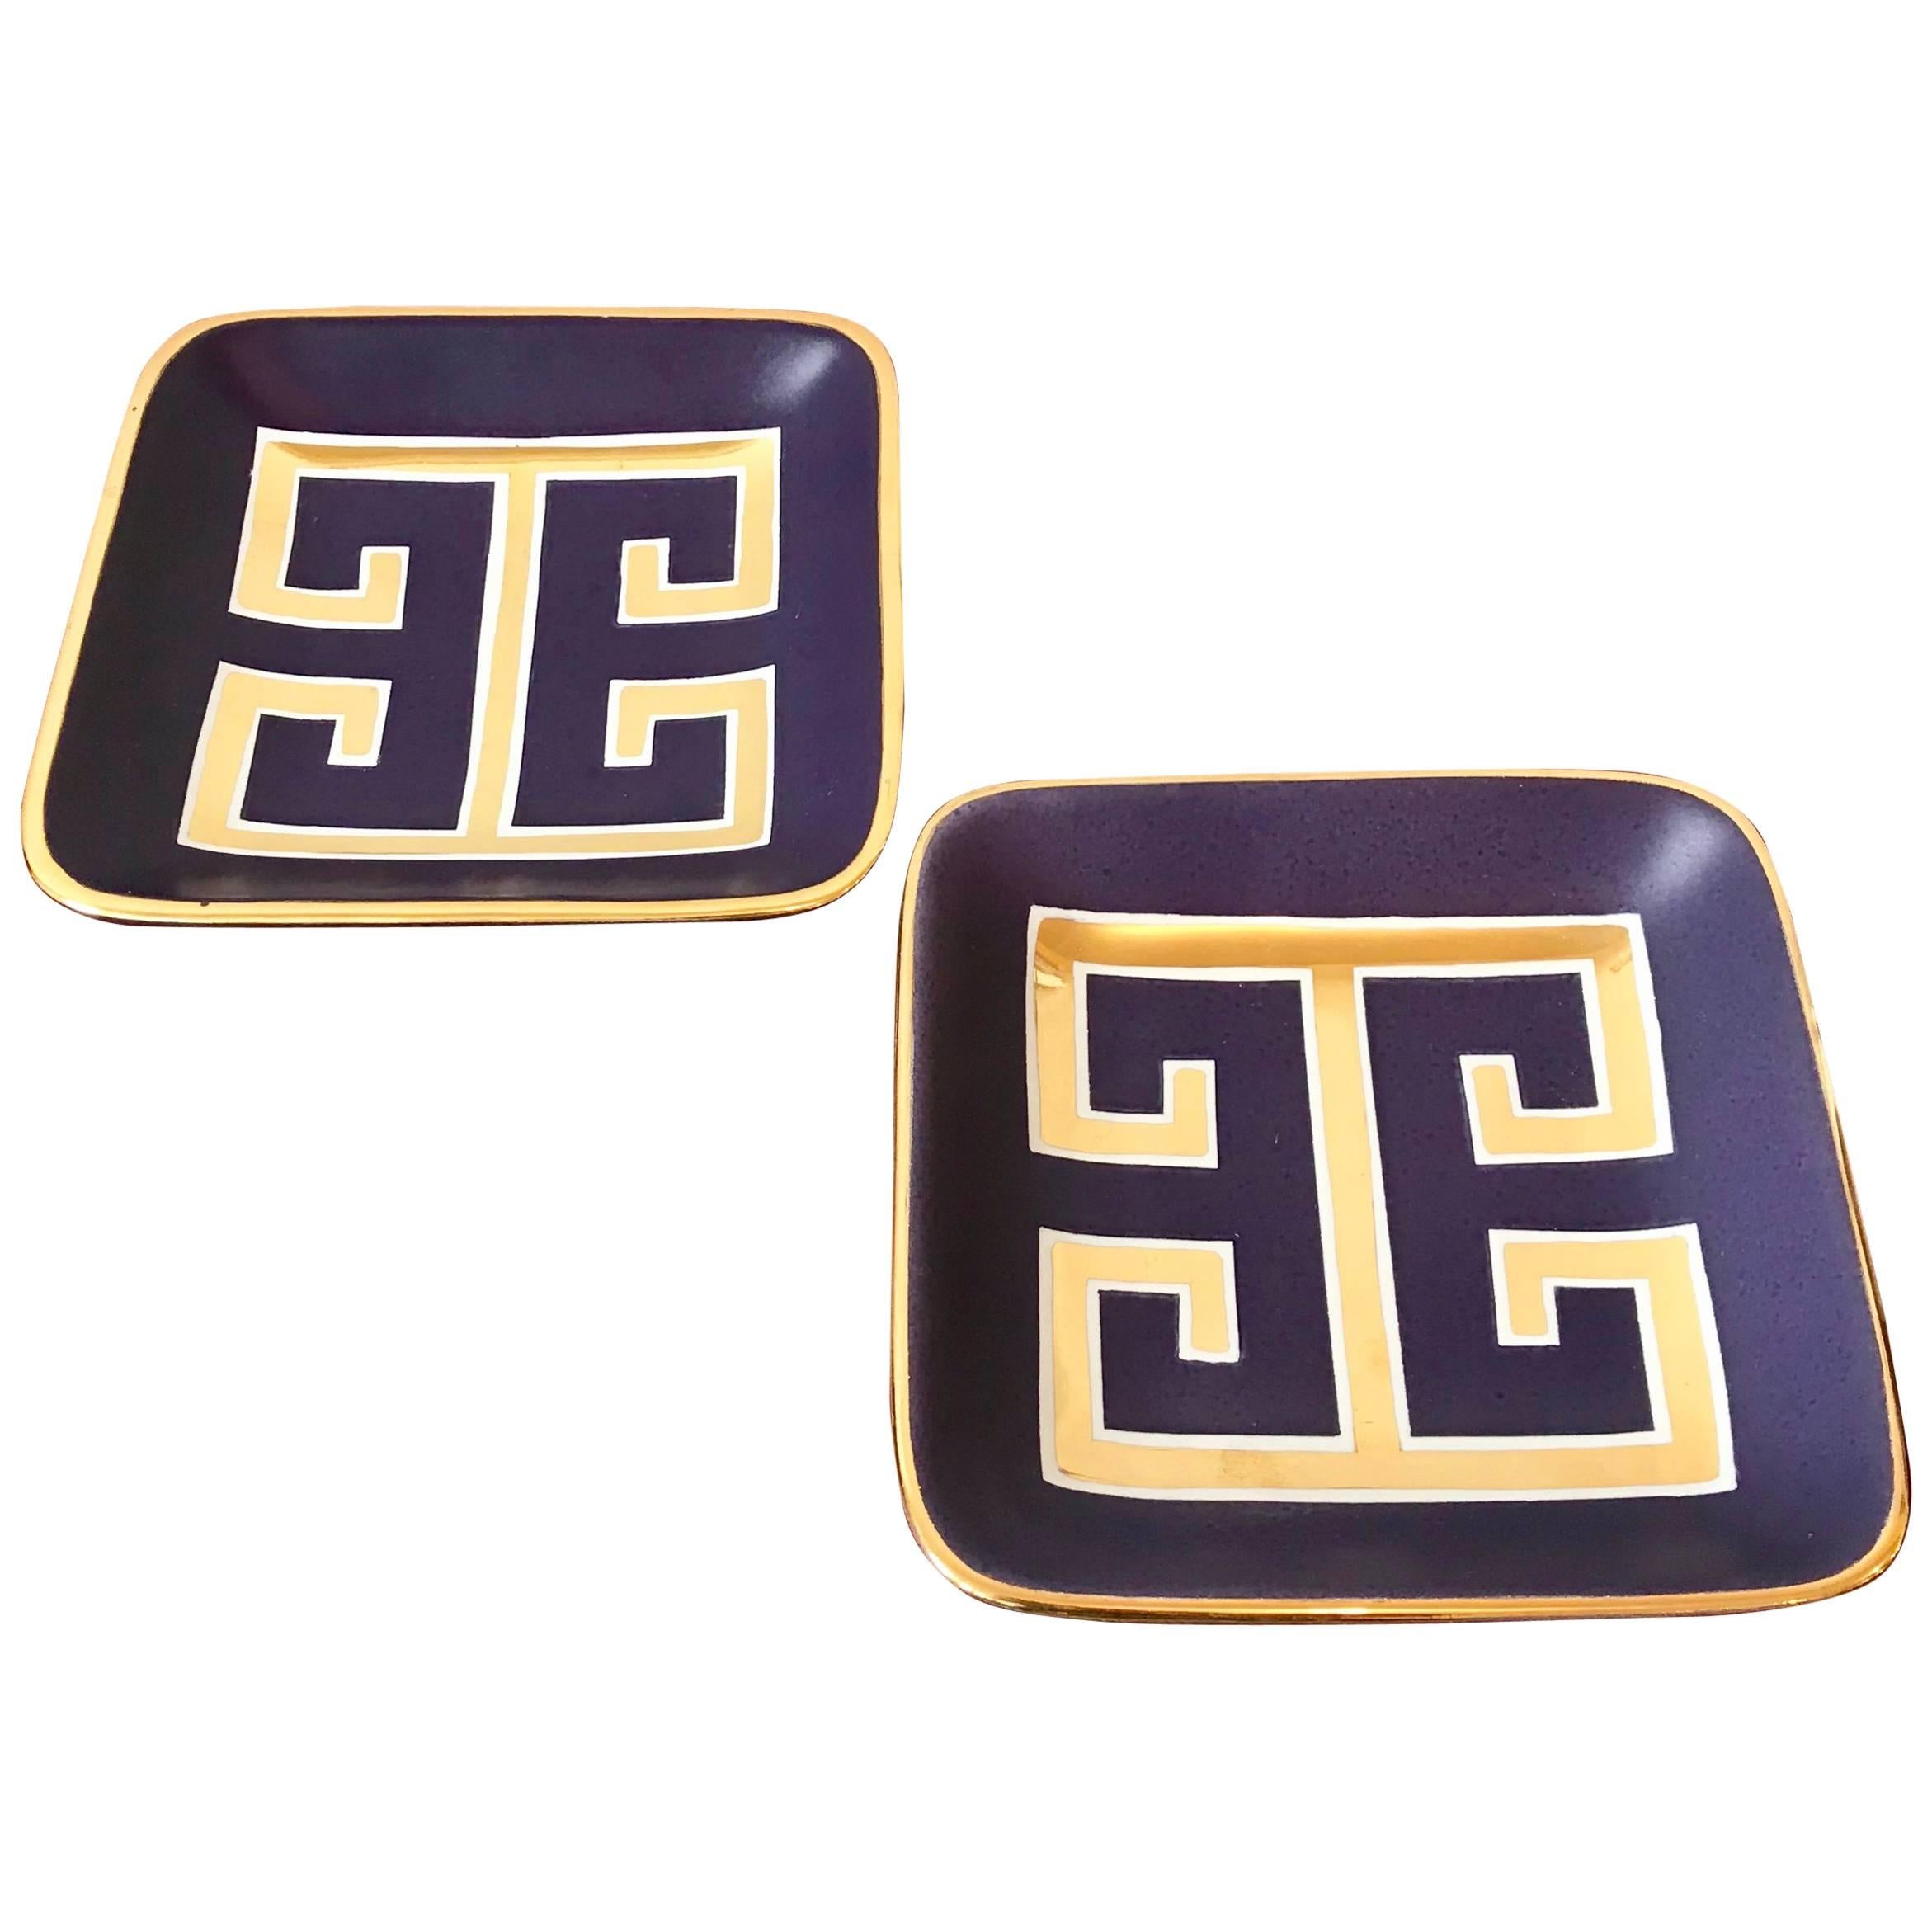 Pair of Waylande Gregory Small Square Purple Ceramic Trays with Gold Key Pattern